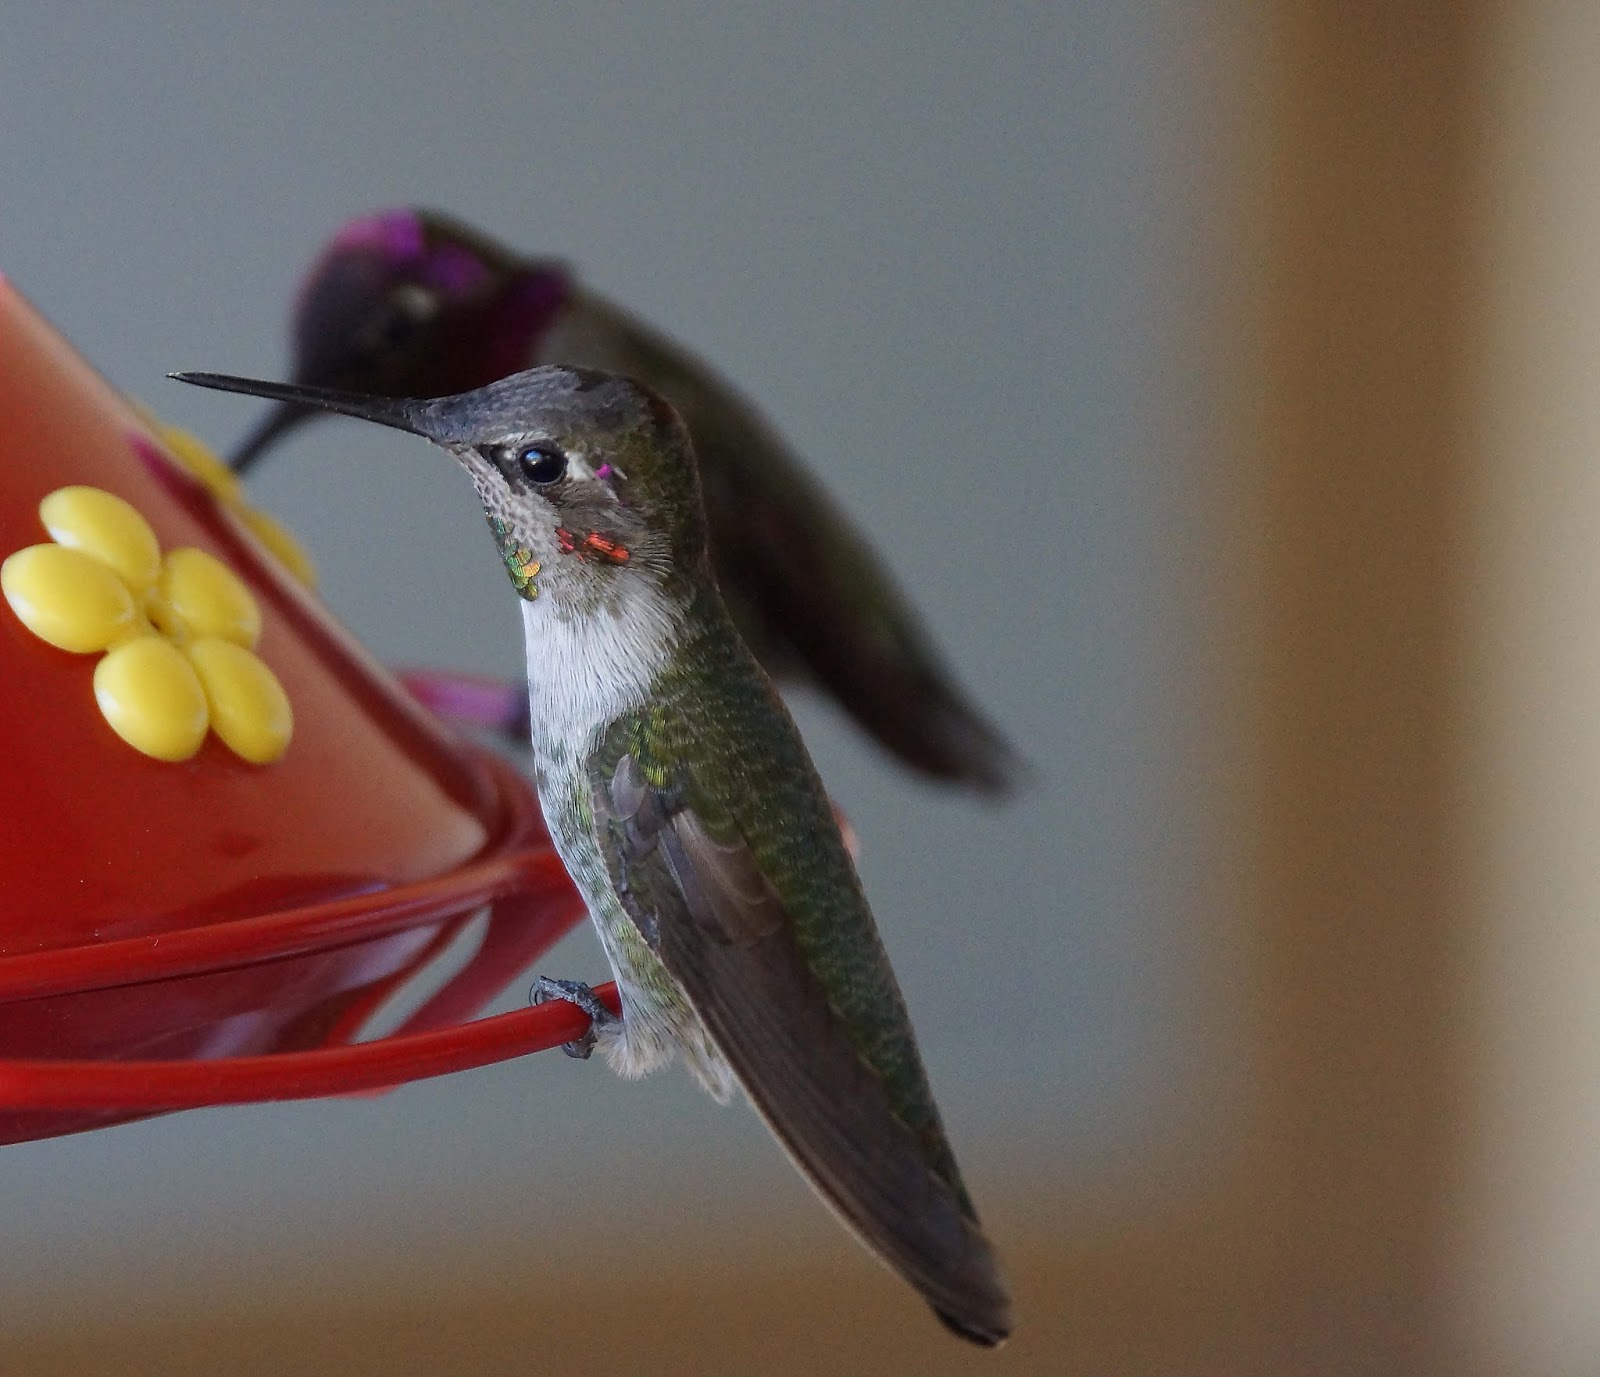 Tecoma x 'Sparky®': More Food For The Hummingbirds